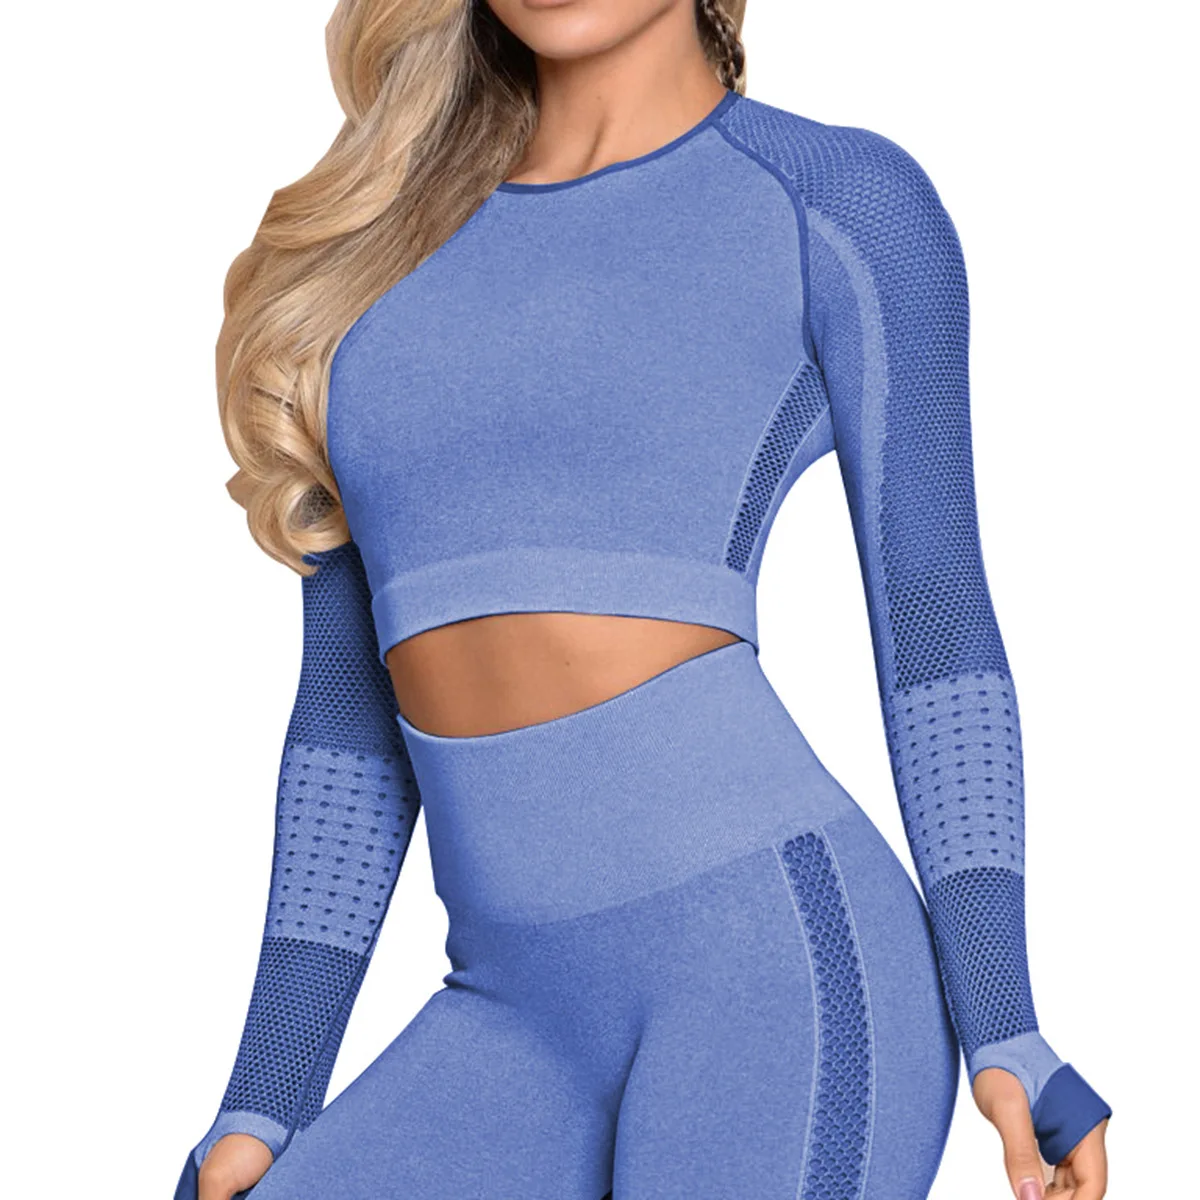 Gym Clothes UK - Wholesale Activewear Manufacturer - Private Label  Activewear In USA, Australia, Canada, UK, Europe, UAE Contact us :   Bulk order trendy & comfortable  private label activewear from Gym